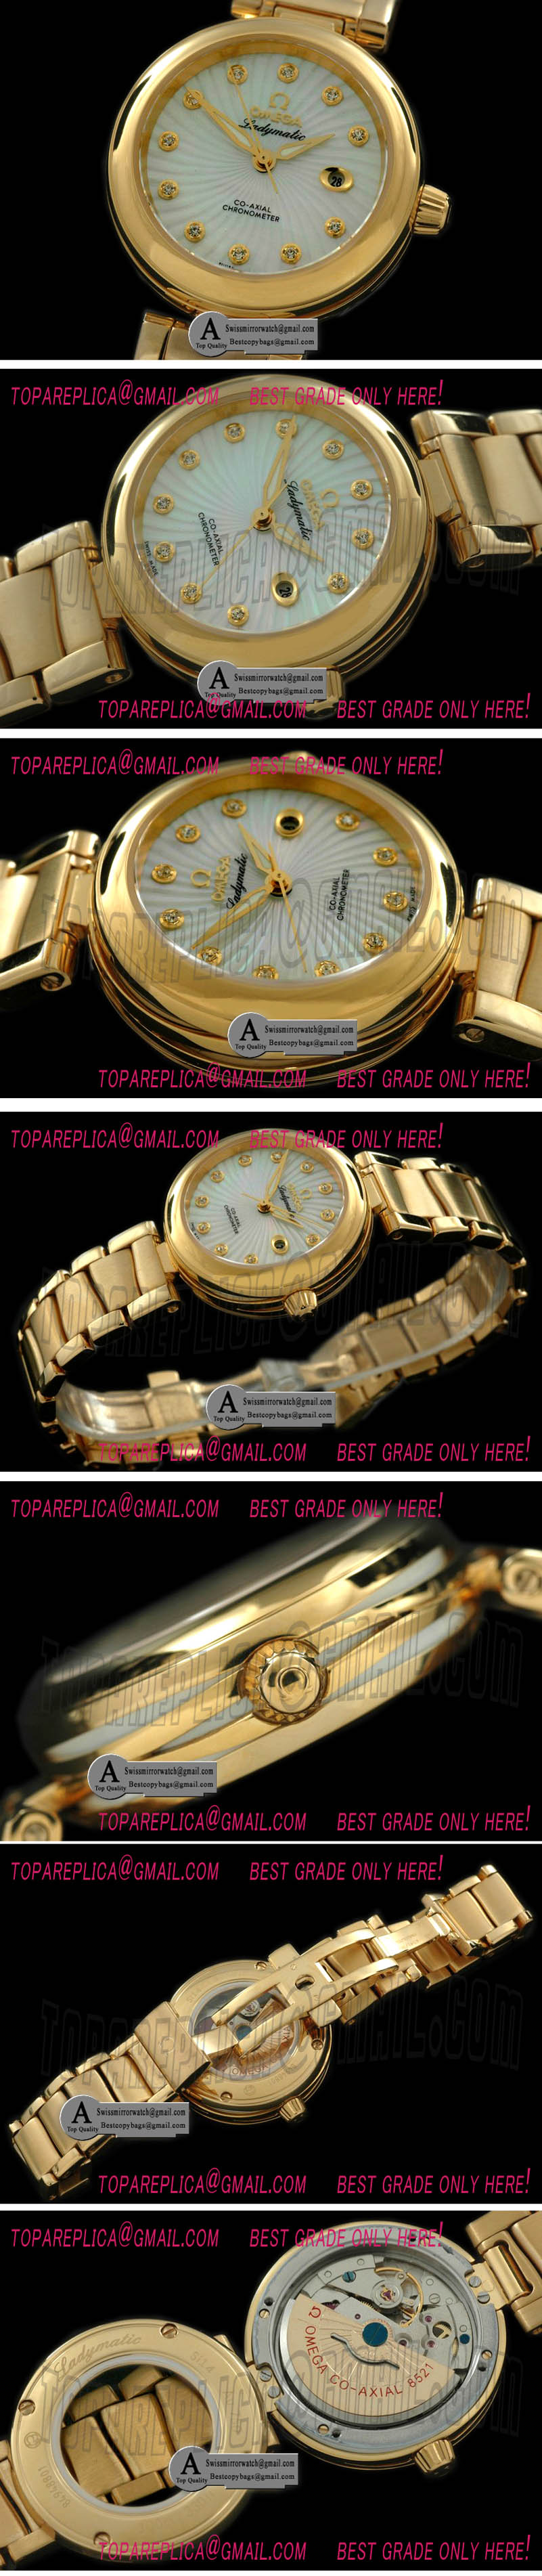 Omega 425.60.34.20.55.002 Deville Ladymatic Mid Yellow Gold/Yellow Gold White 2813 21J Replica Watches